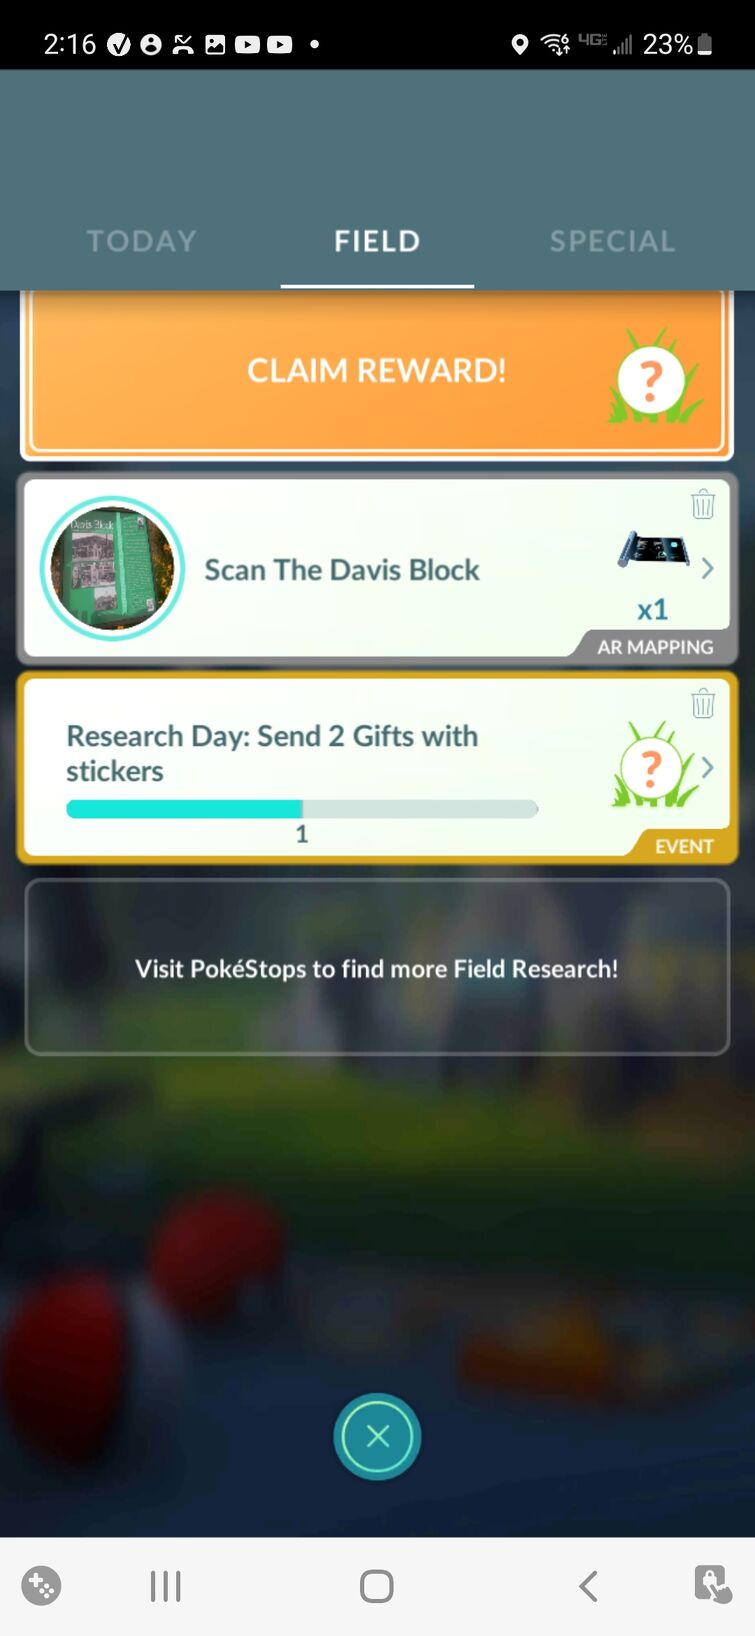 Pokémon GO Ultra Unlock: Research Day Features Boosted Shinies Today